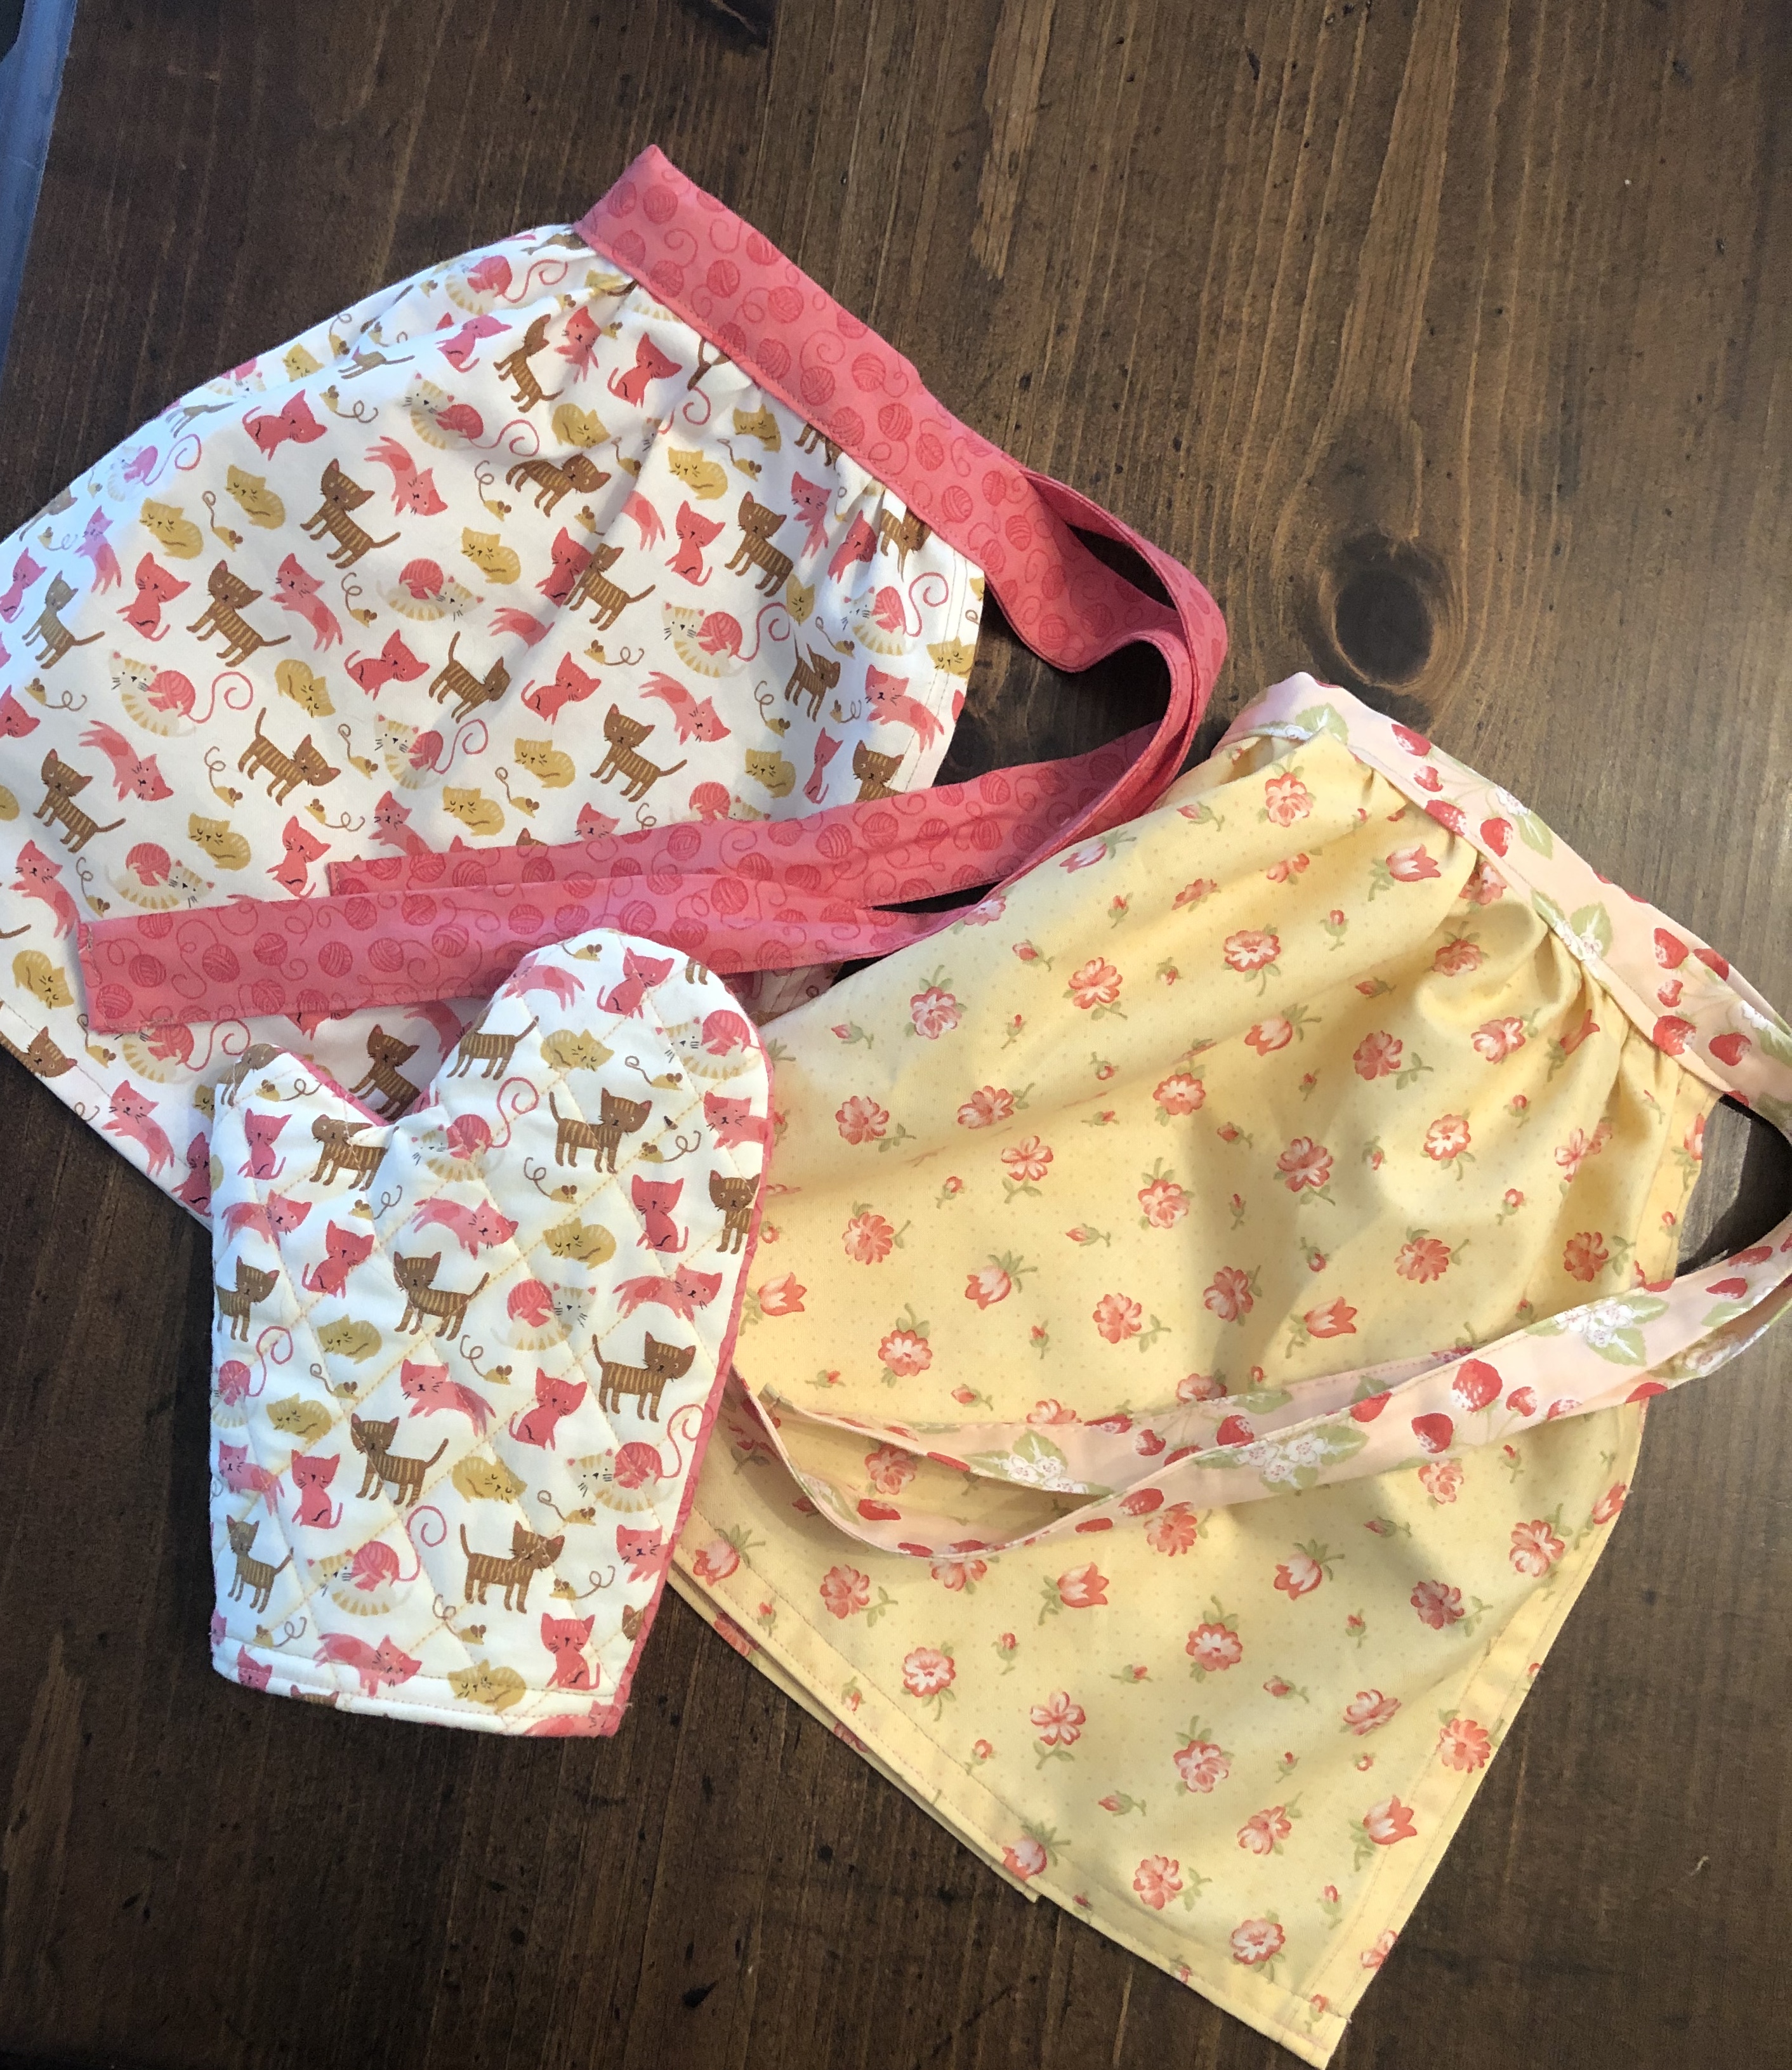 Aprons and matching oven mitts